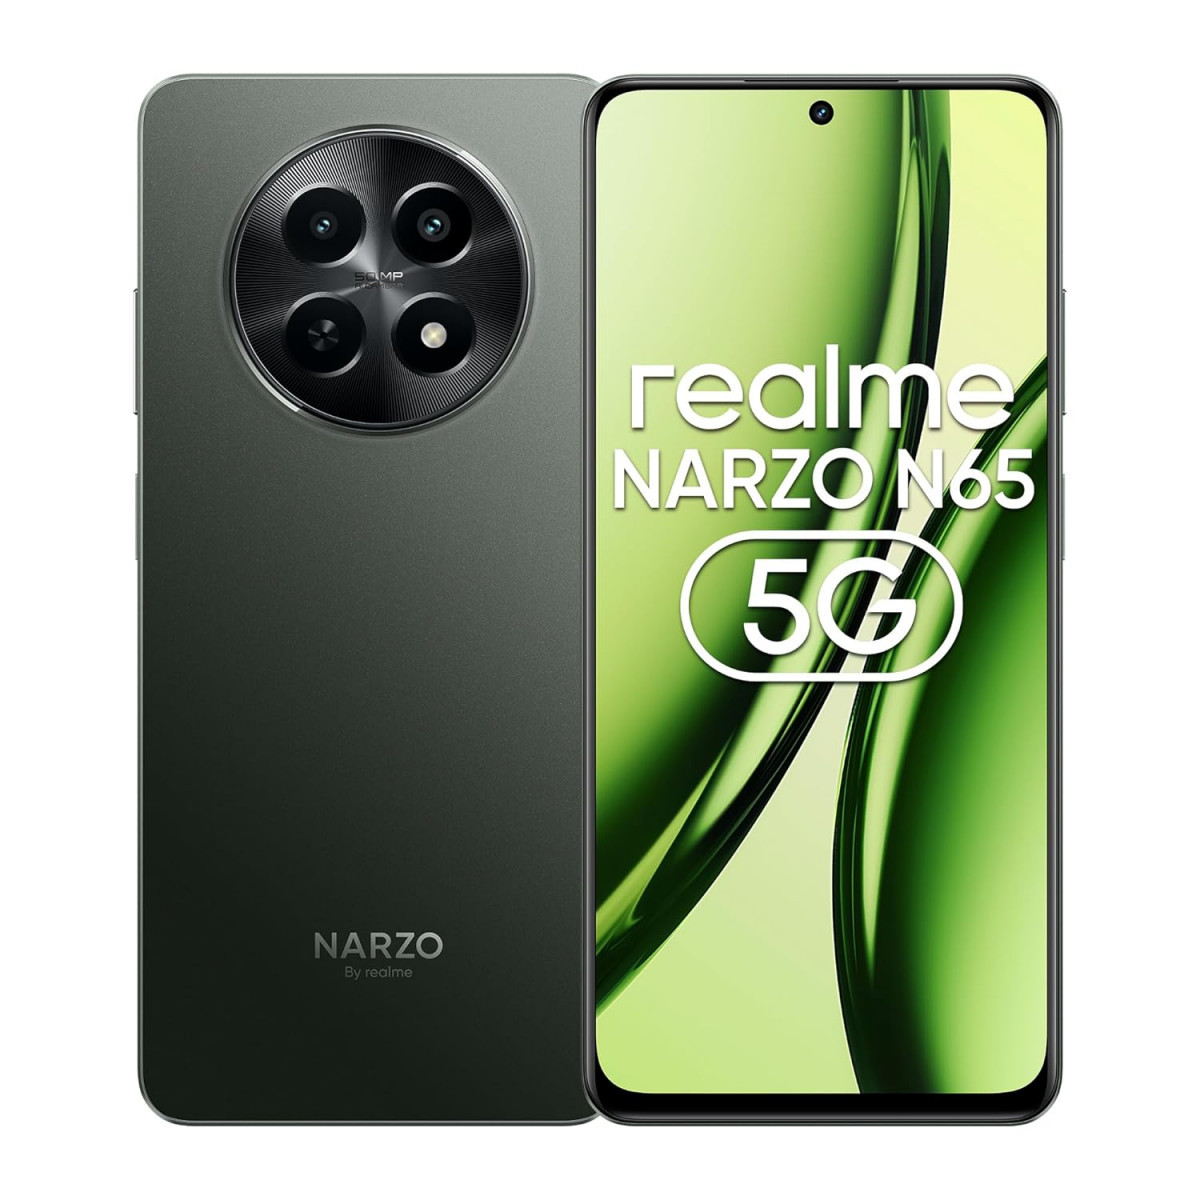 realme NARZO N65 5G Deep Green 4GB RAM 128GB Storage India039s 1st D6300 5G Chipset  Ultra Slim 190g Design  120Hz Eye Comfort Display  50MP AI Camera Charger in The Box